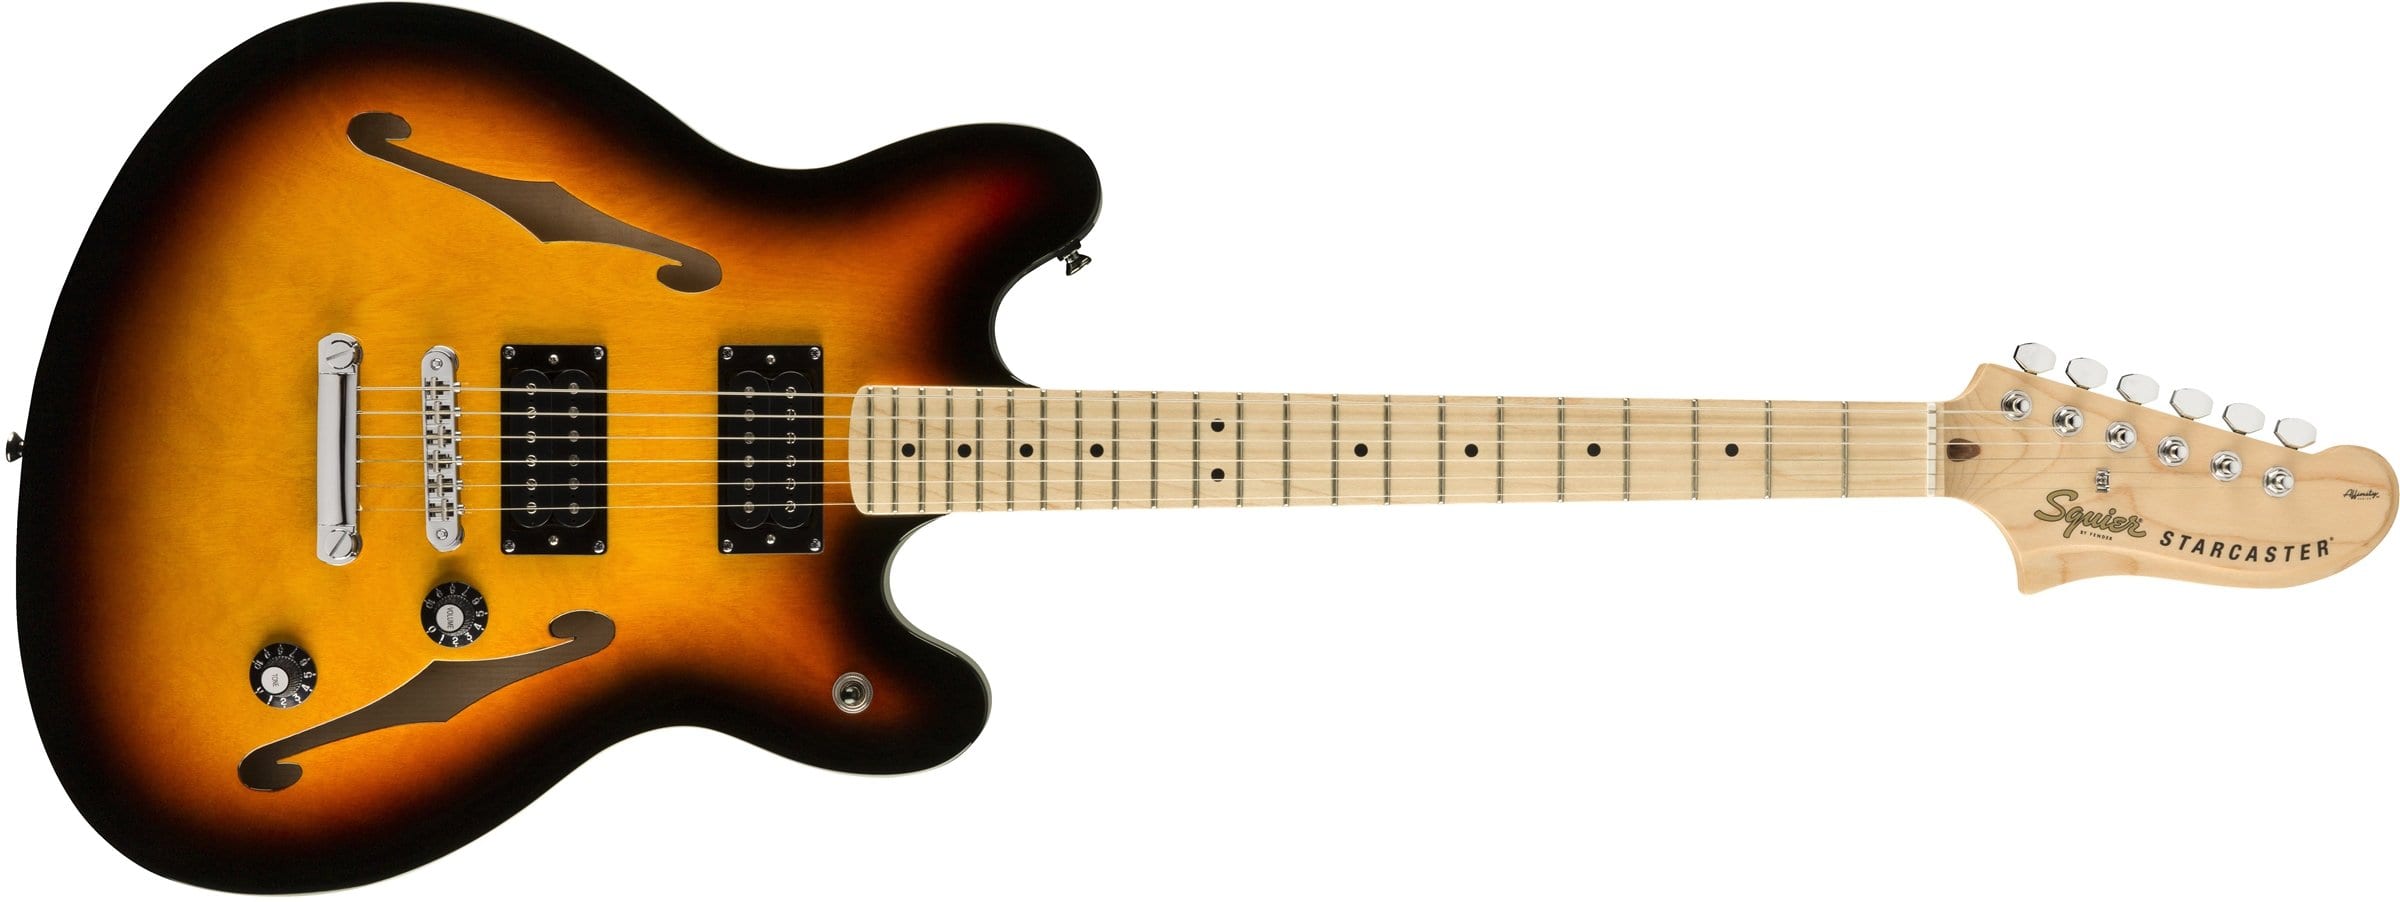 Squier Starcaster Affinity Series